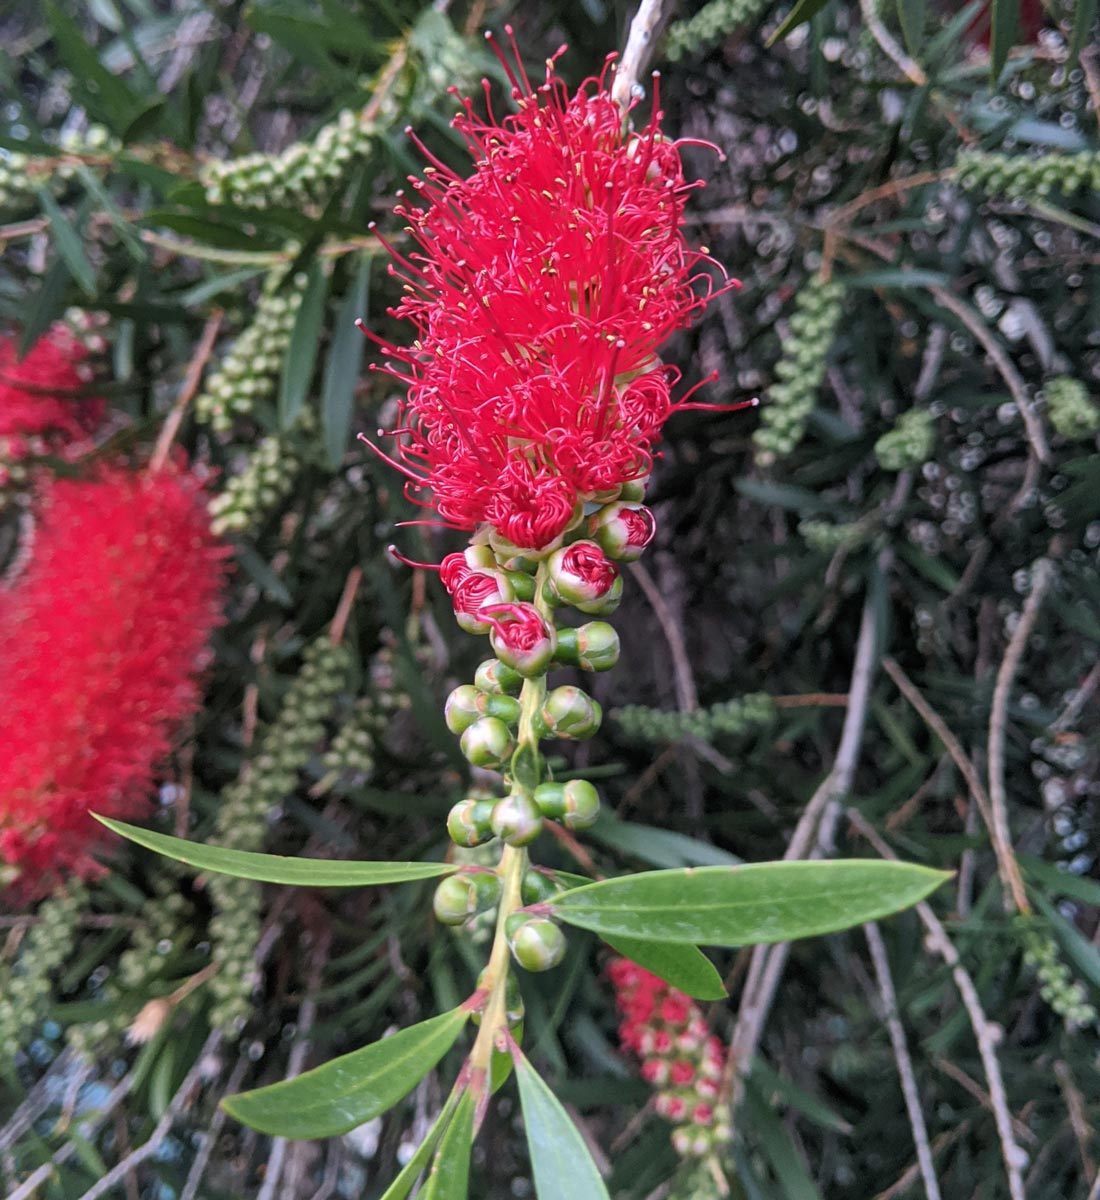 Bottlebrush flowers at various stages of opening